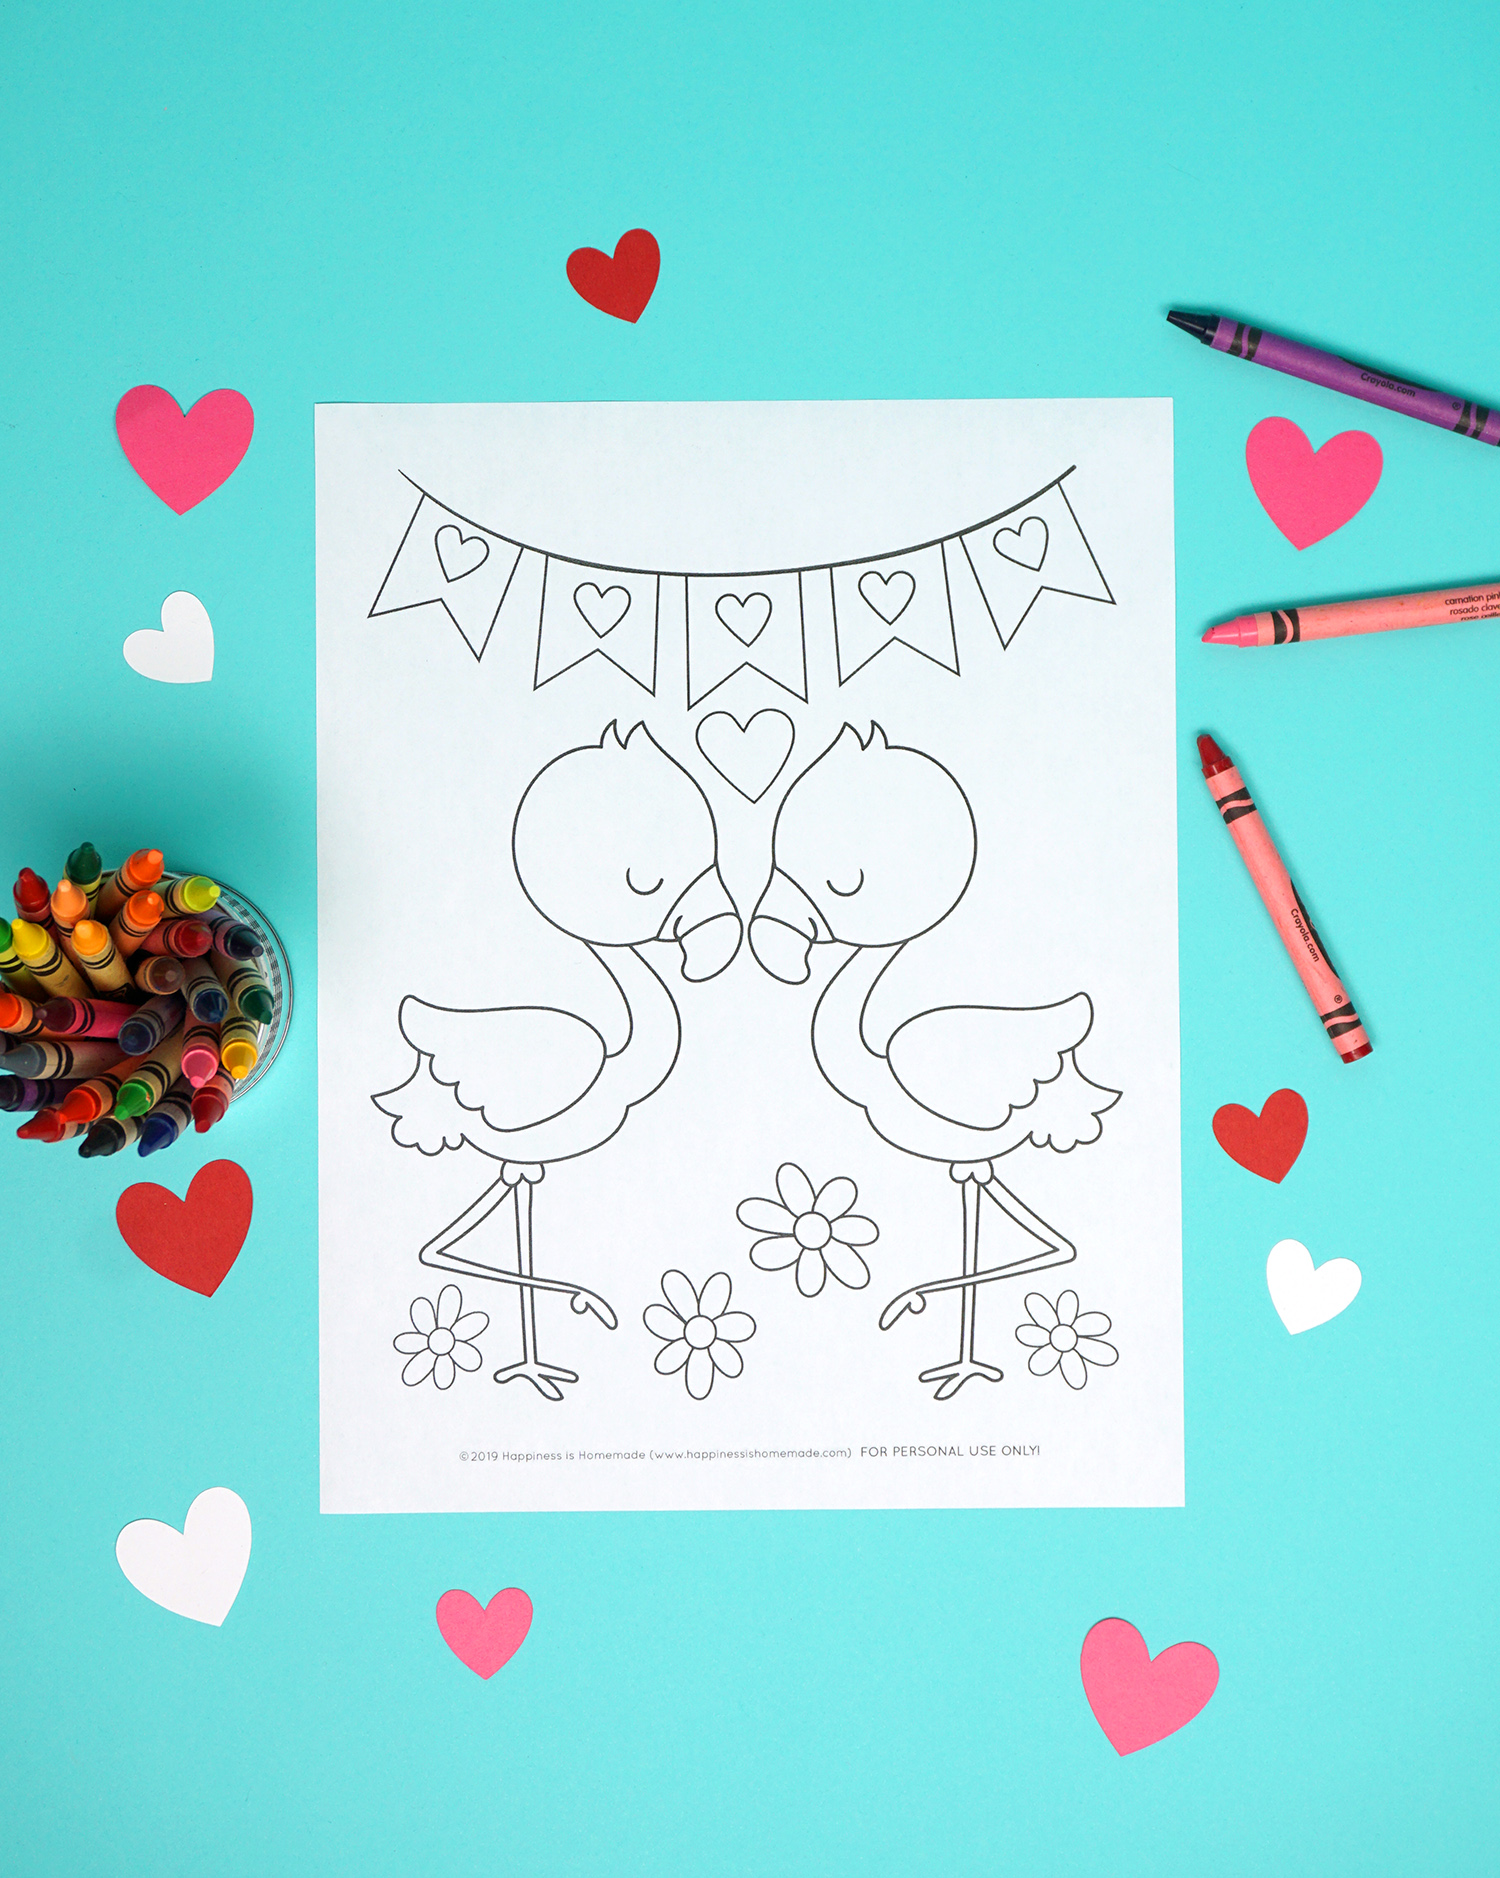 Flamingo coloring page on aqua background with crayons and hearts